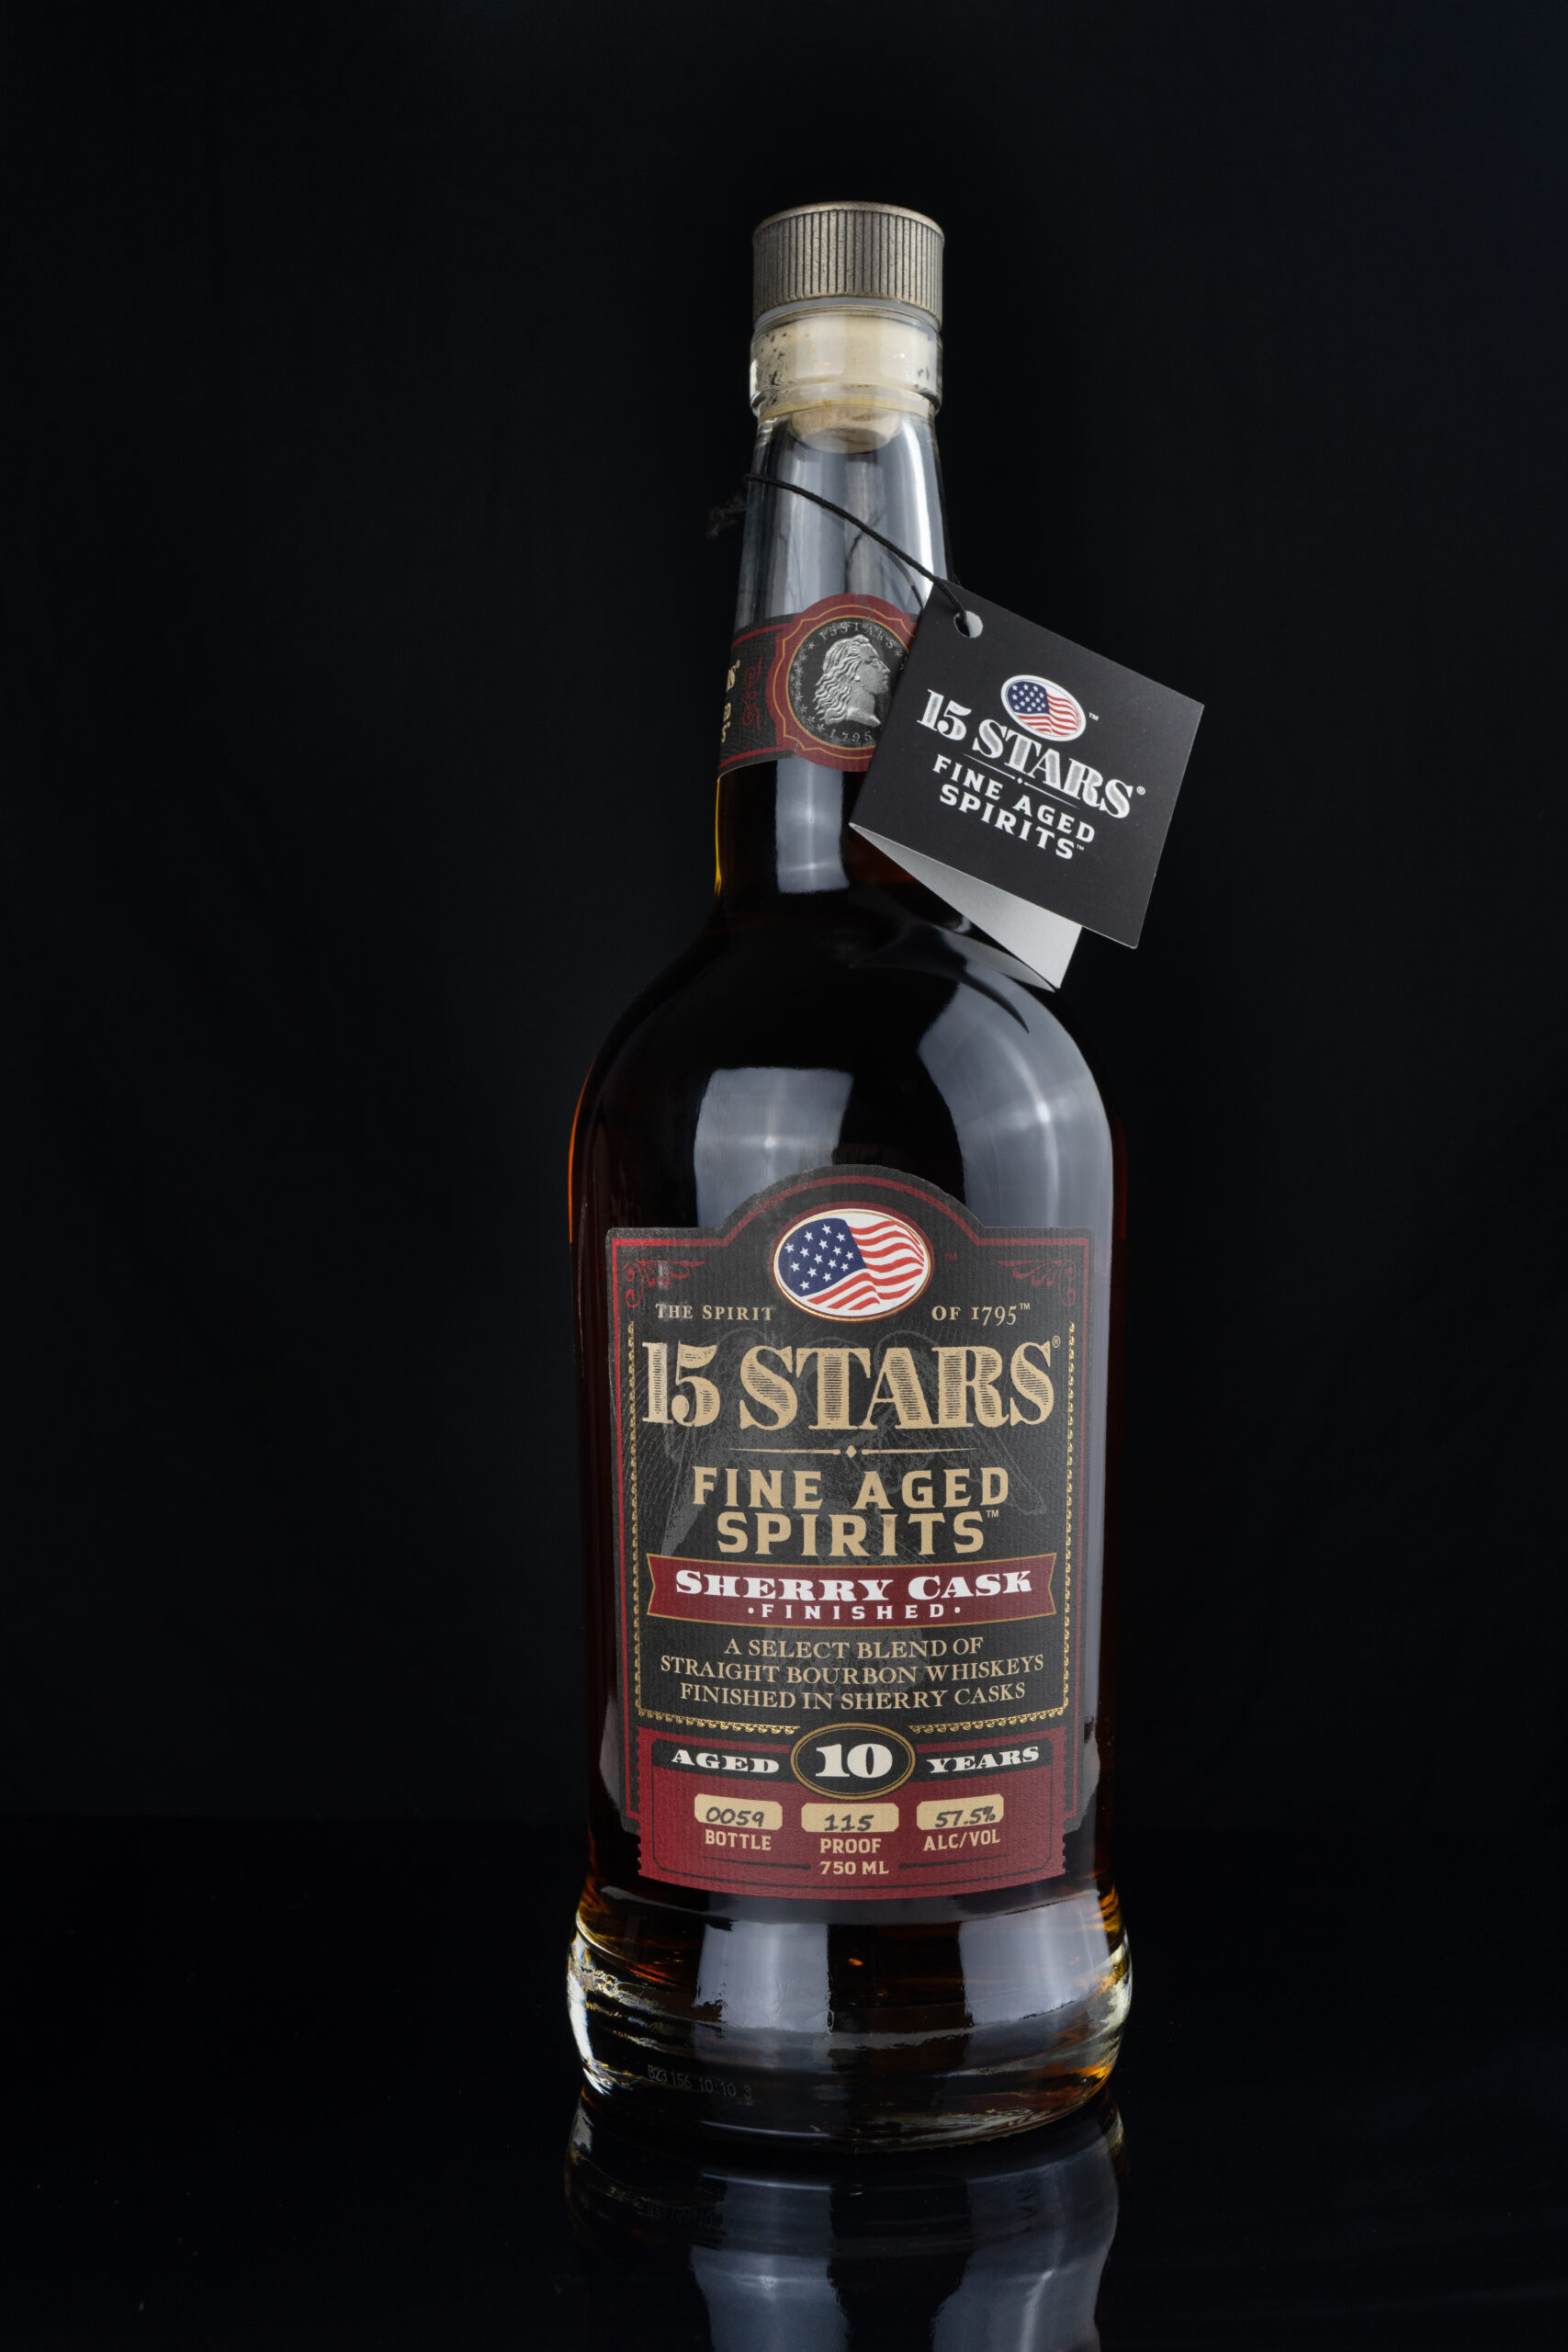 A bottle of 15 STARS Sherry Cask Finish against a black background.